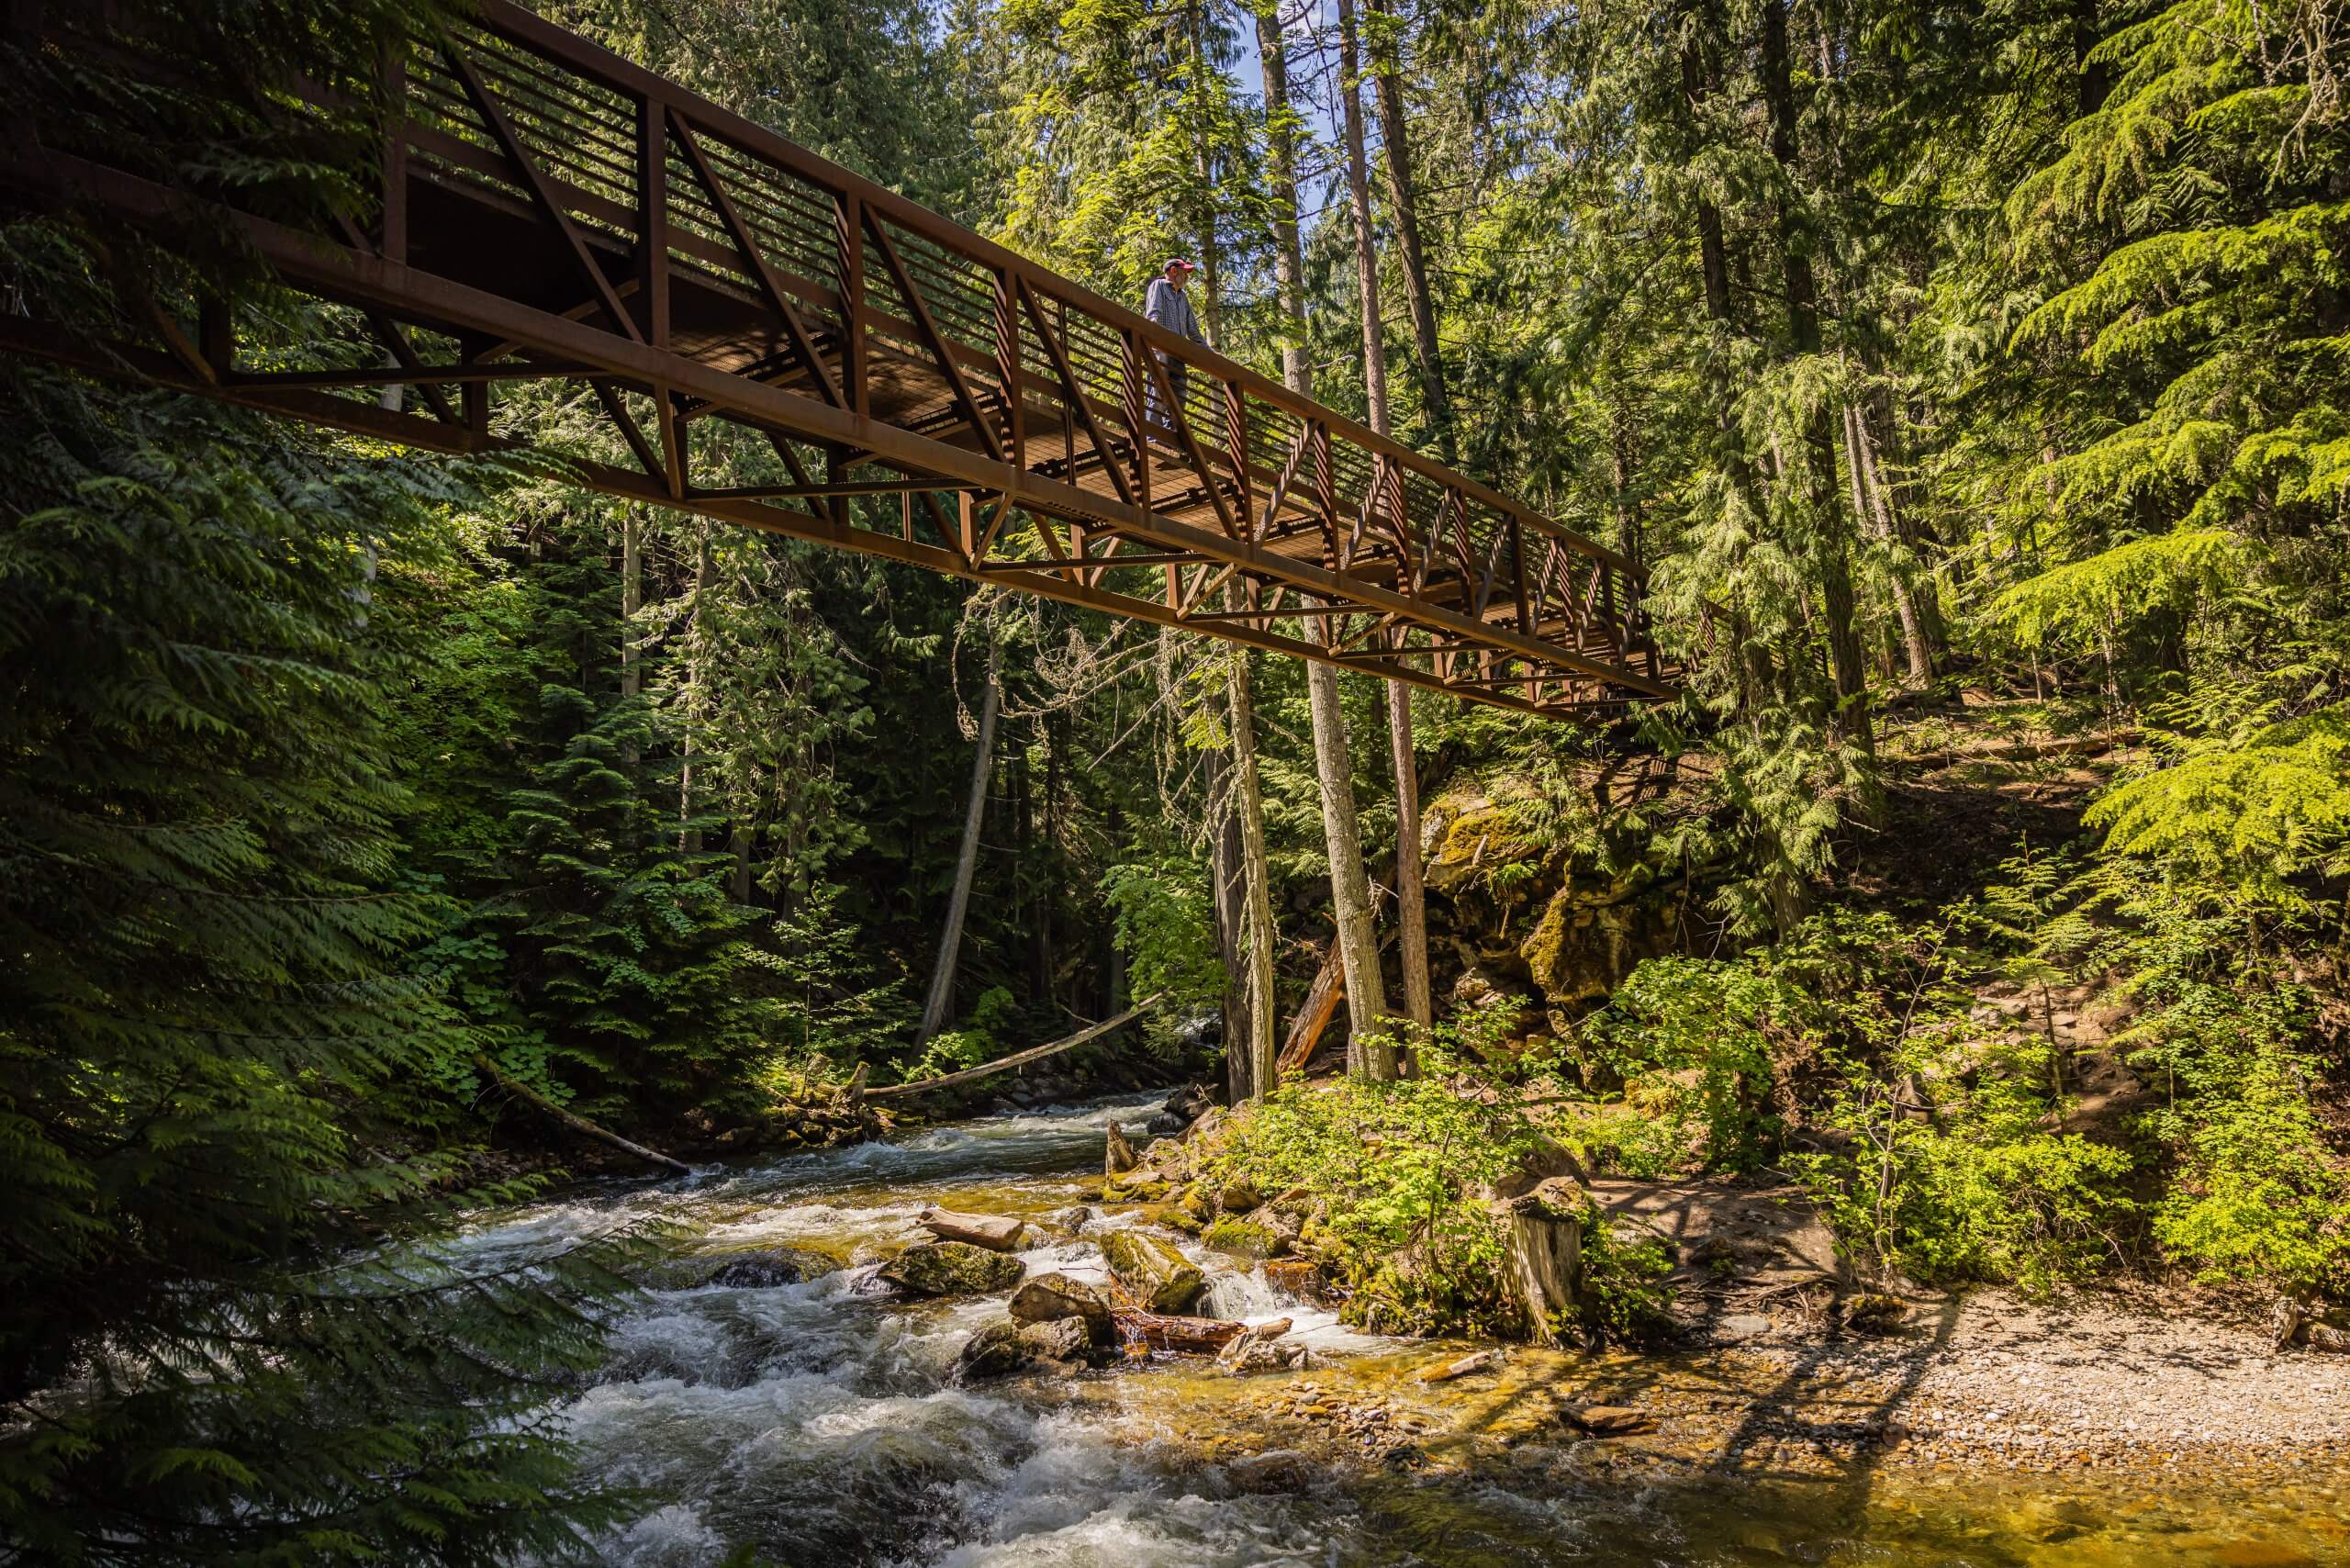 A person stands on a bridge on the Myrtle Falls Trail overlooking a stream in a lush forested area.